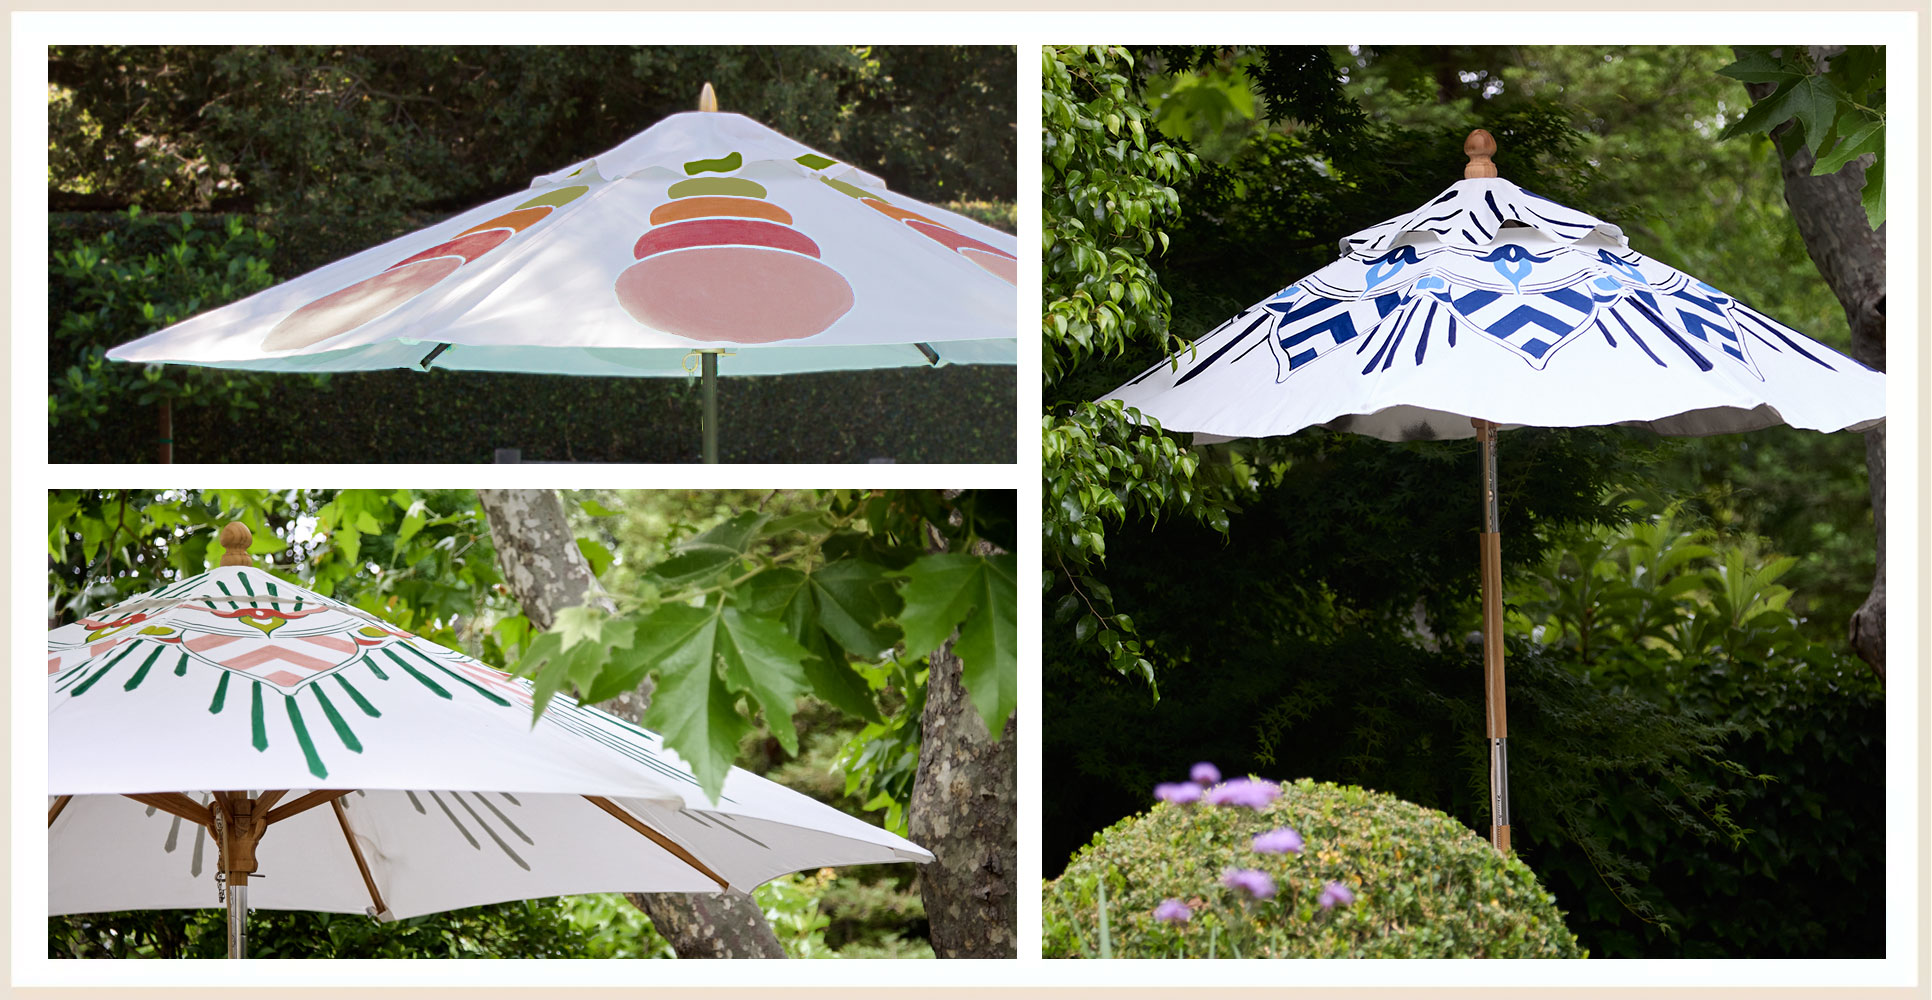 unique patio umbrella by the pool, painted by pearl and maude perfect for outdoor entertaining, pool parties and summer fun in the garden, fun garden furniture